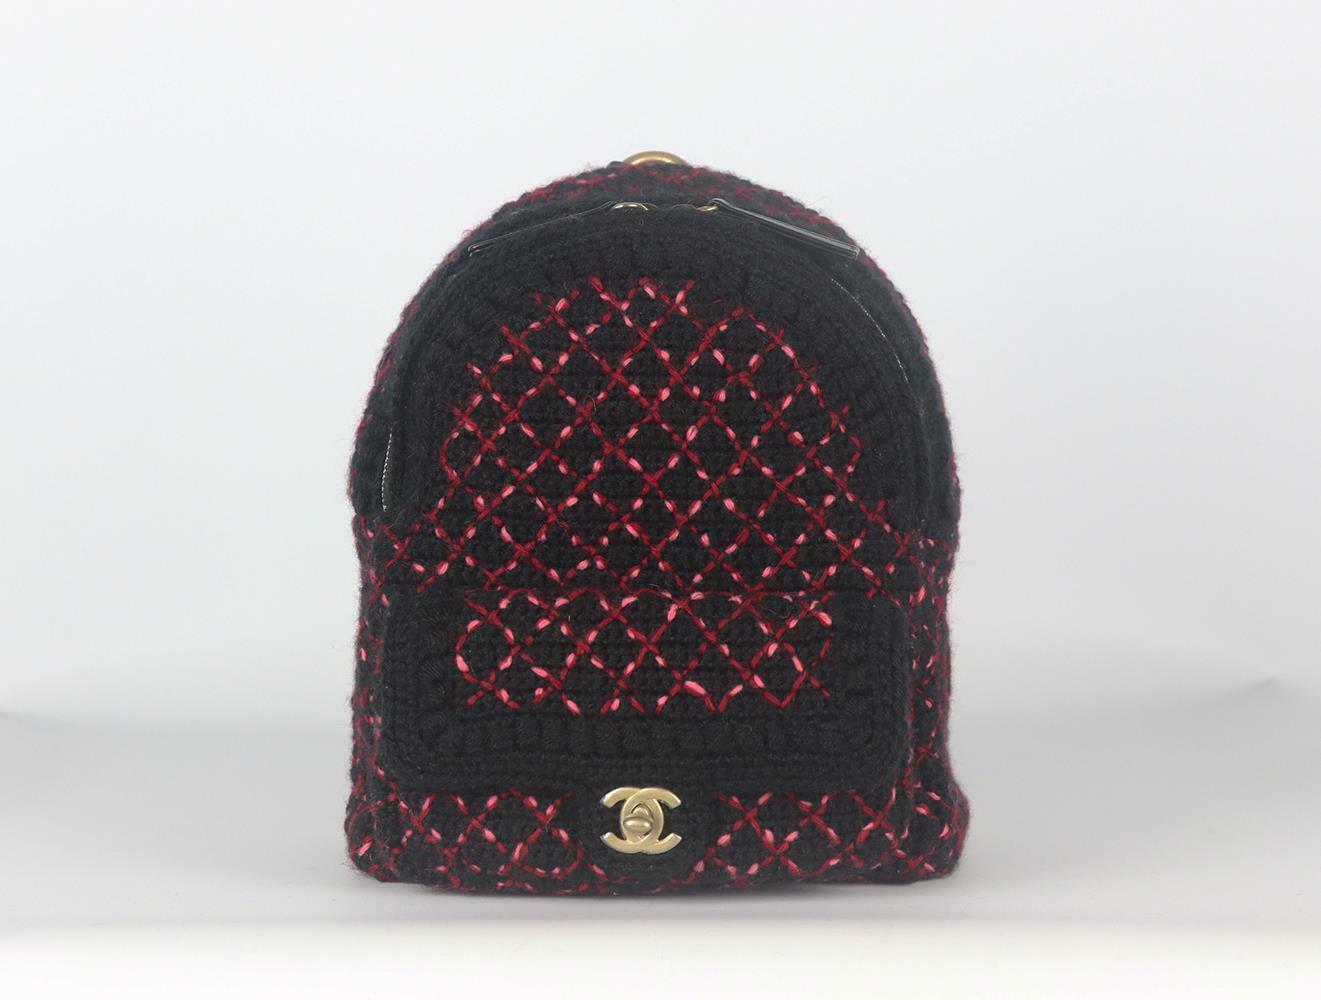 Made in Italy, this beautiful Chanel backpack has been made from black, red and pink wool knitted exterior with pink fabric interior, this piece is decorated with Chanel's antiqued-gold embroidered twist-lock logo on the front and finished with